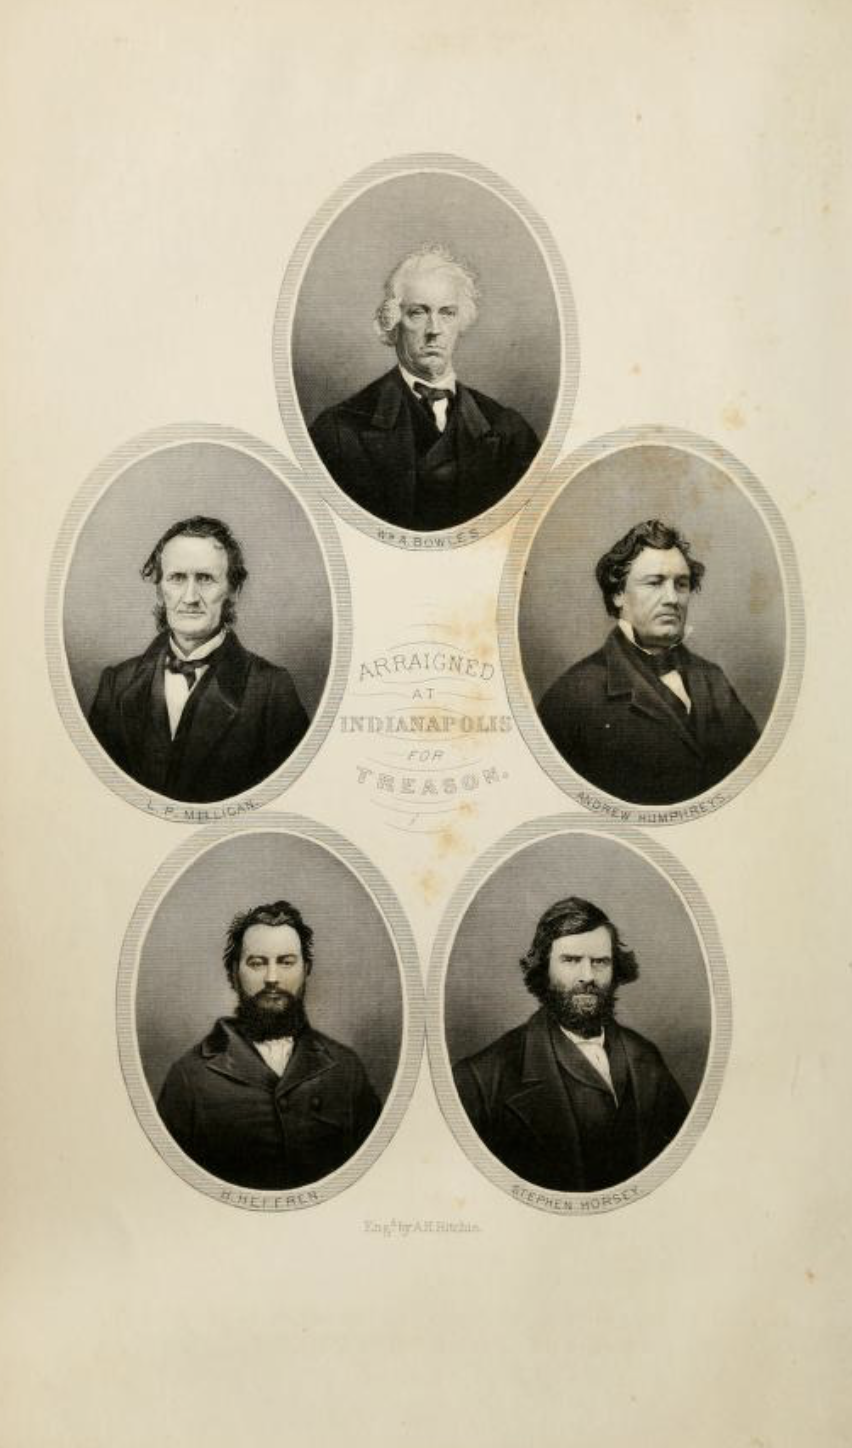 On a single page, photographs of the five defendants are arranged around the words "Arraigned at Indianapolis for Treason".